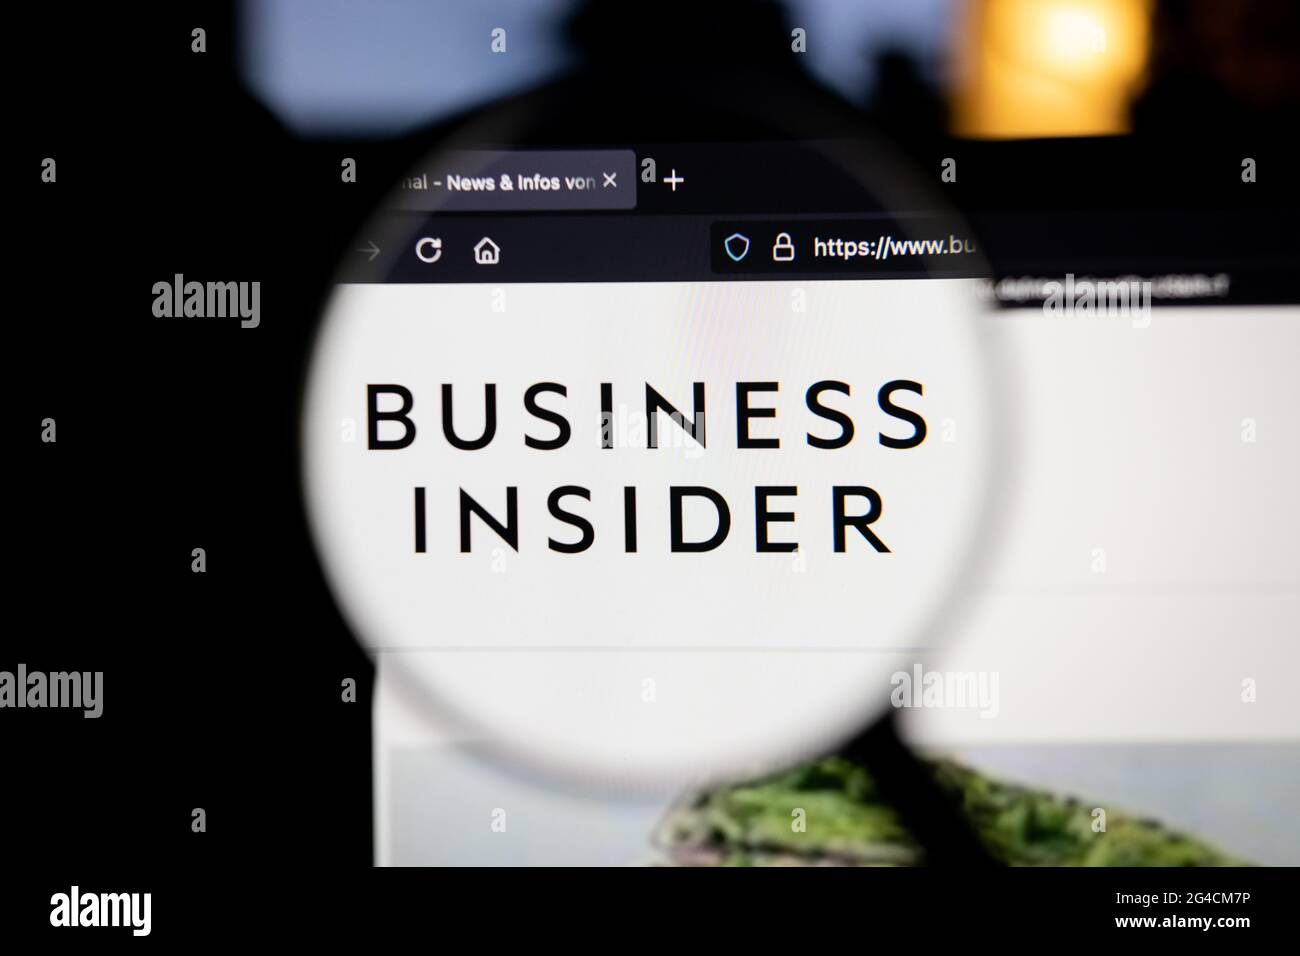 business insider company logo on a website seen on a computer screen through a magnifying glass 2G4CM7P